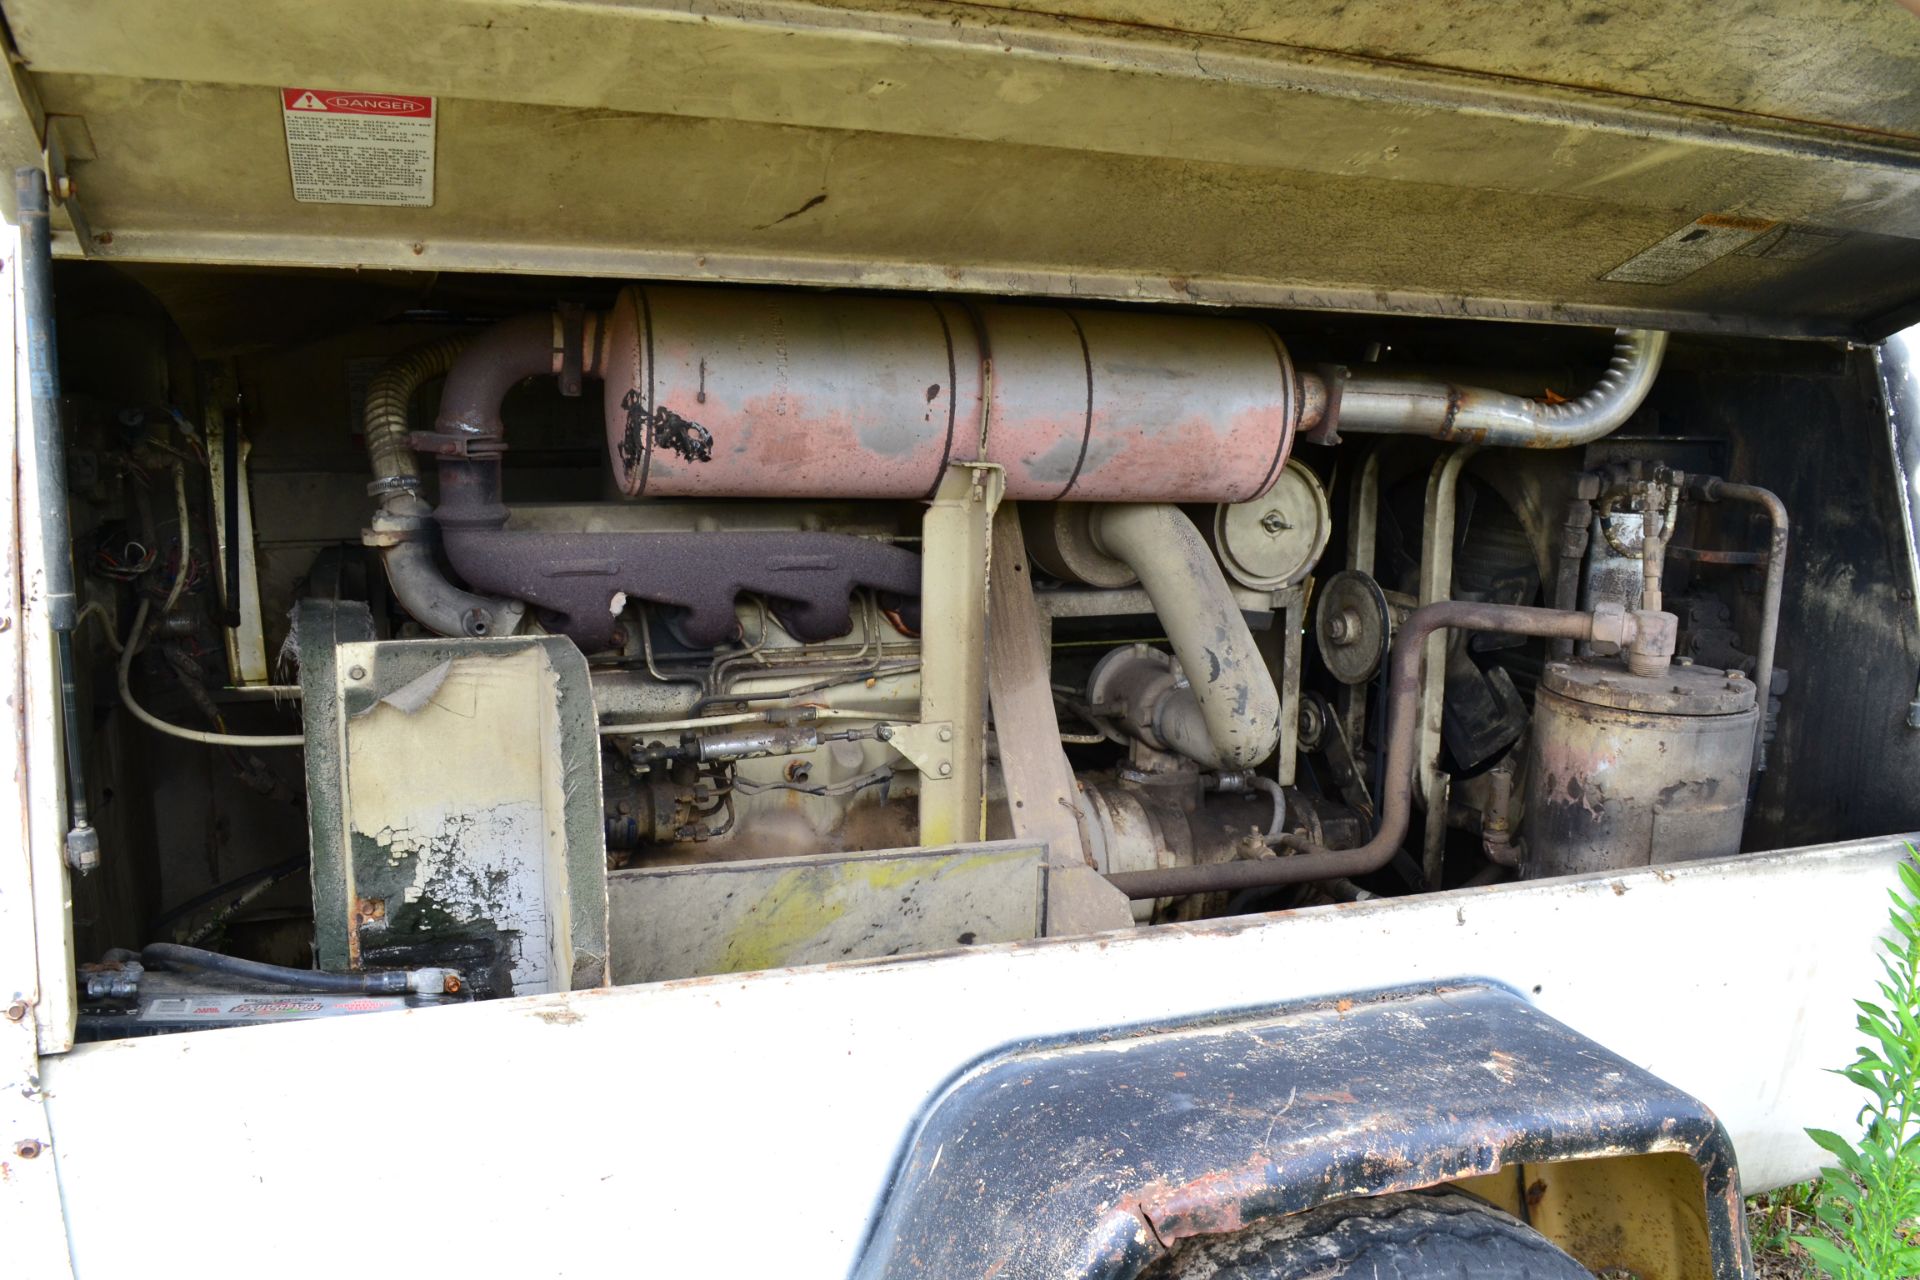 Ingersoll Rand Model 185 Portable Air Compressor, 515 Hours, No Specs Available - Image 4 of 6